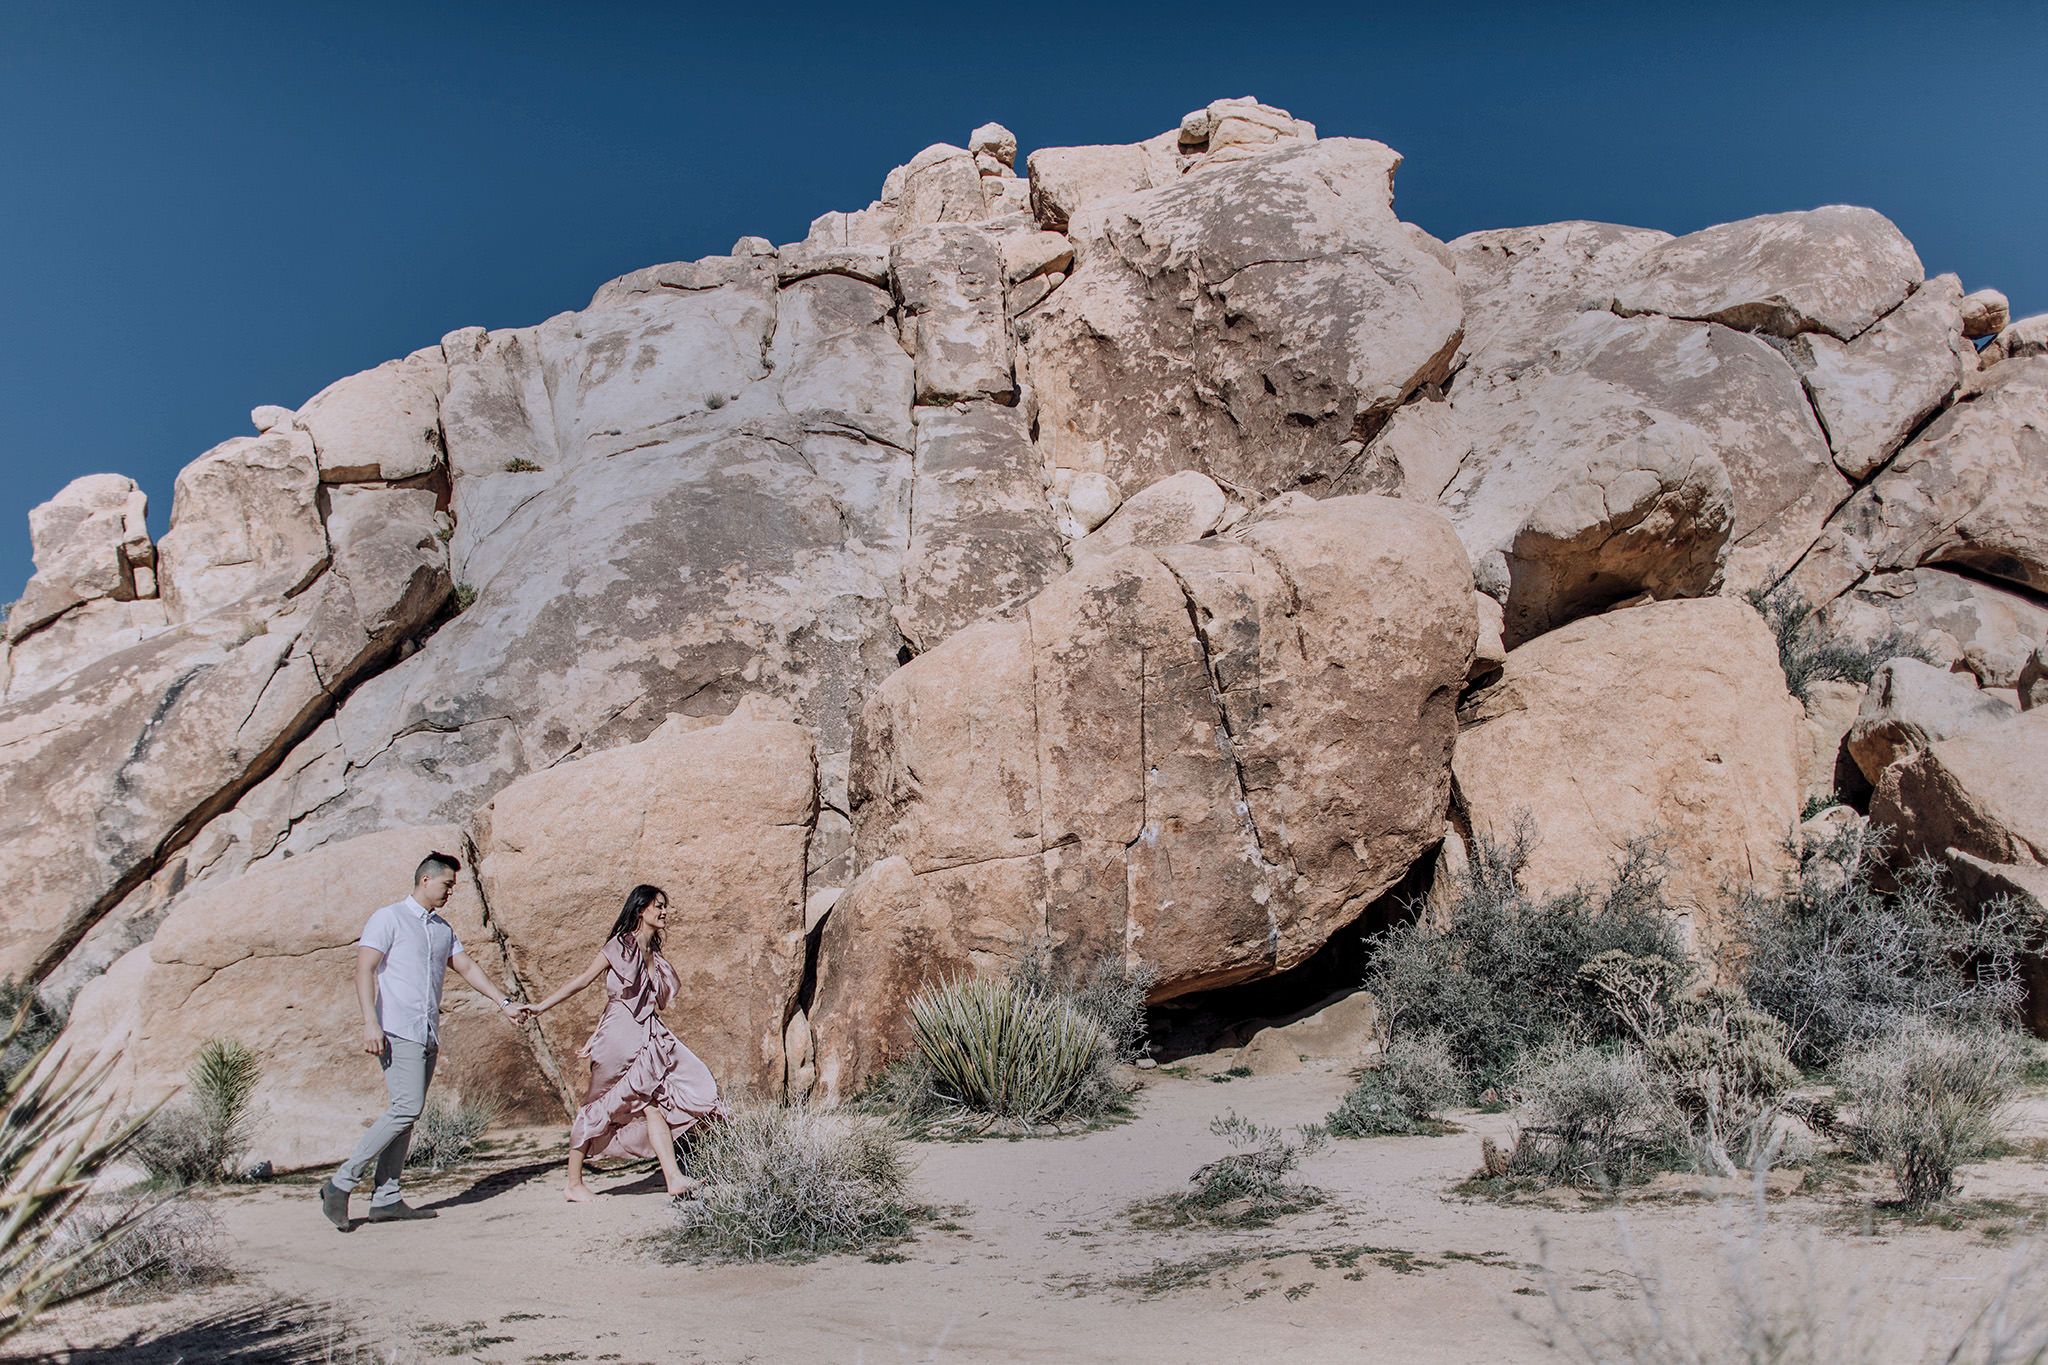 The engaged couple are walking in the mountains, with large rocks in the background. Engagement image by Jenny Fu Studio